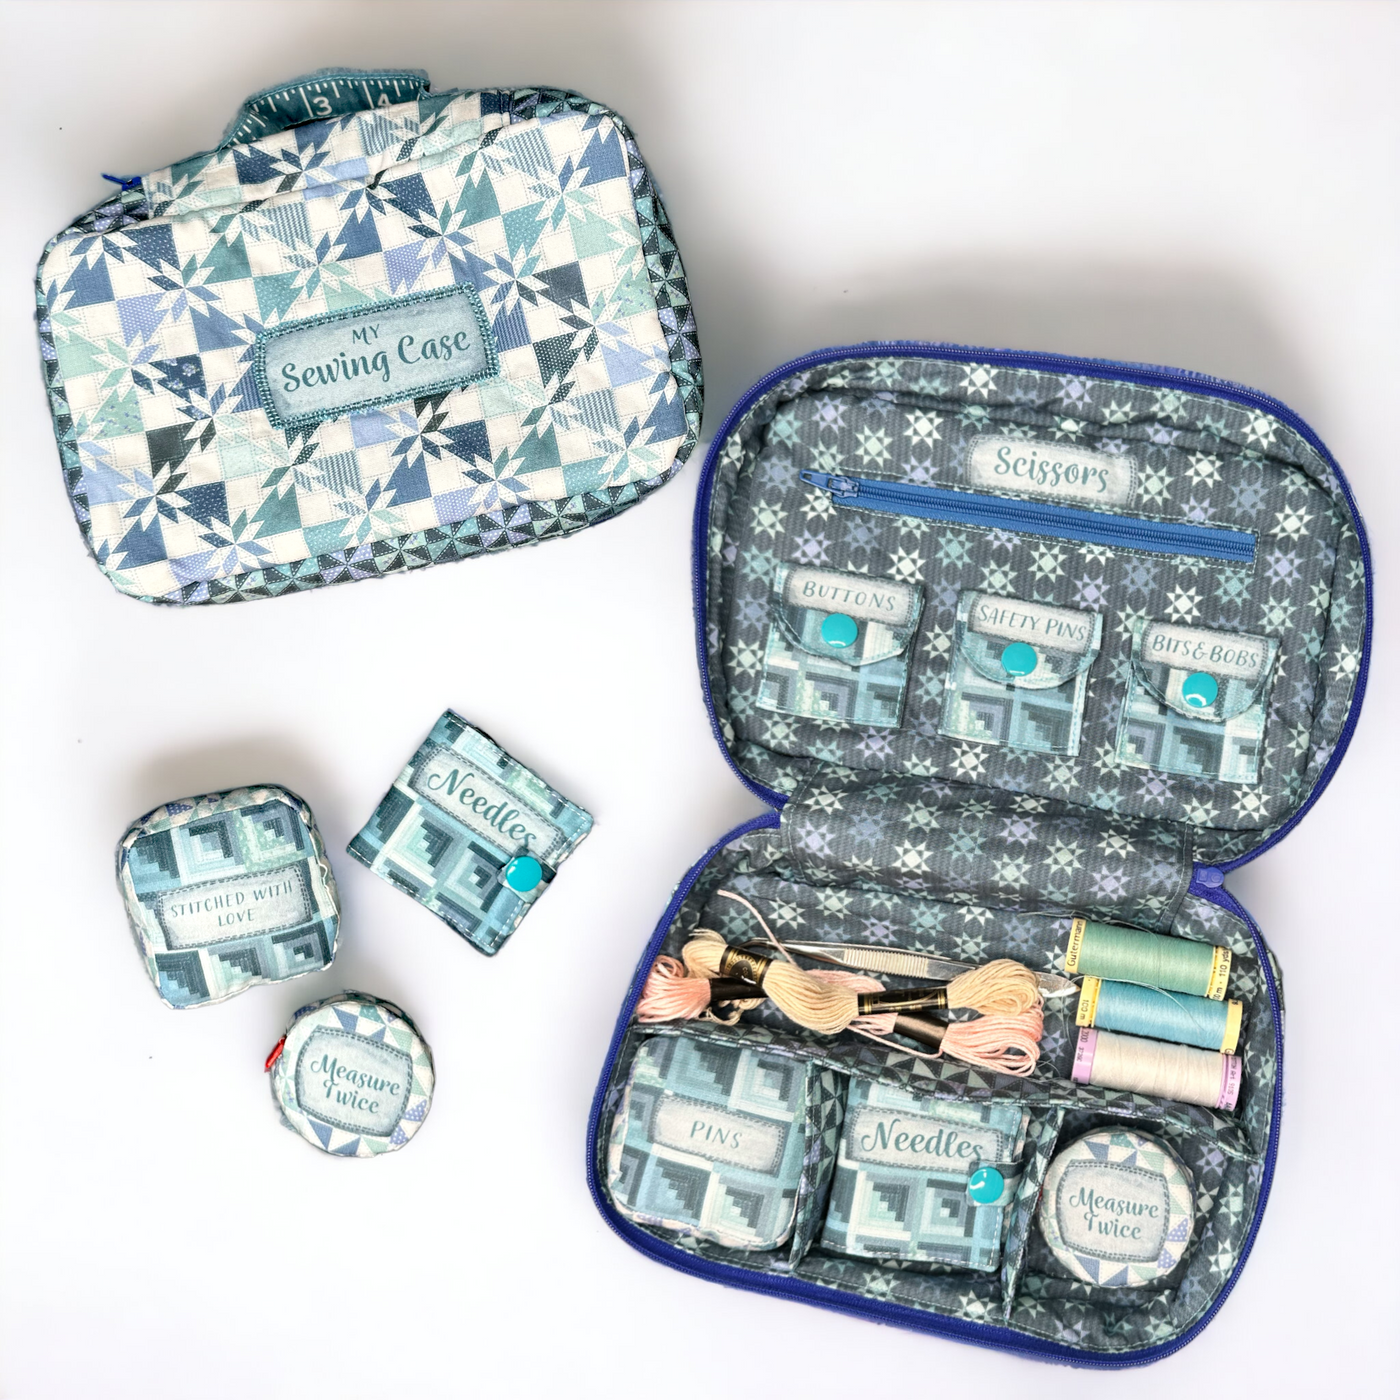 The Sewing Case – Patchwork Kit